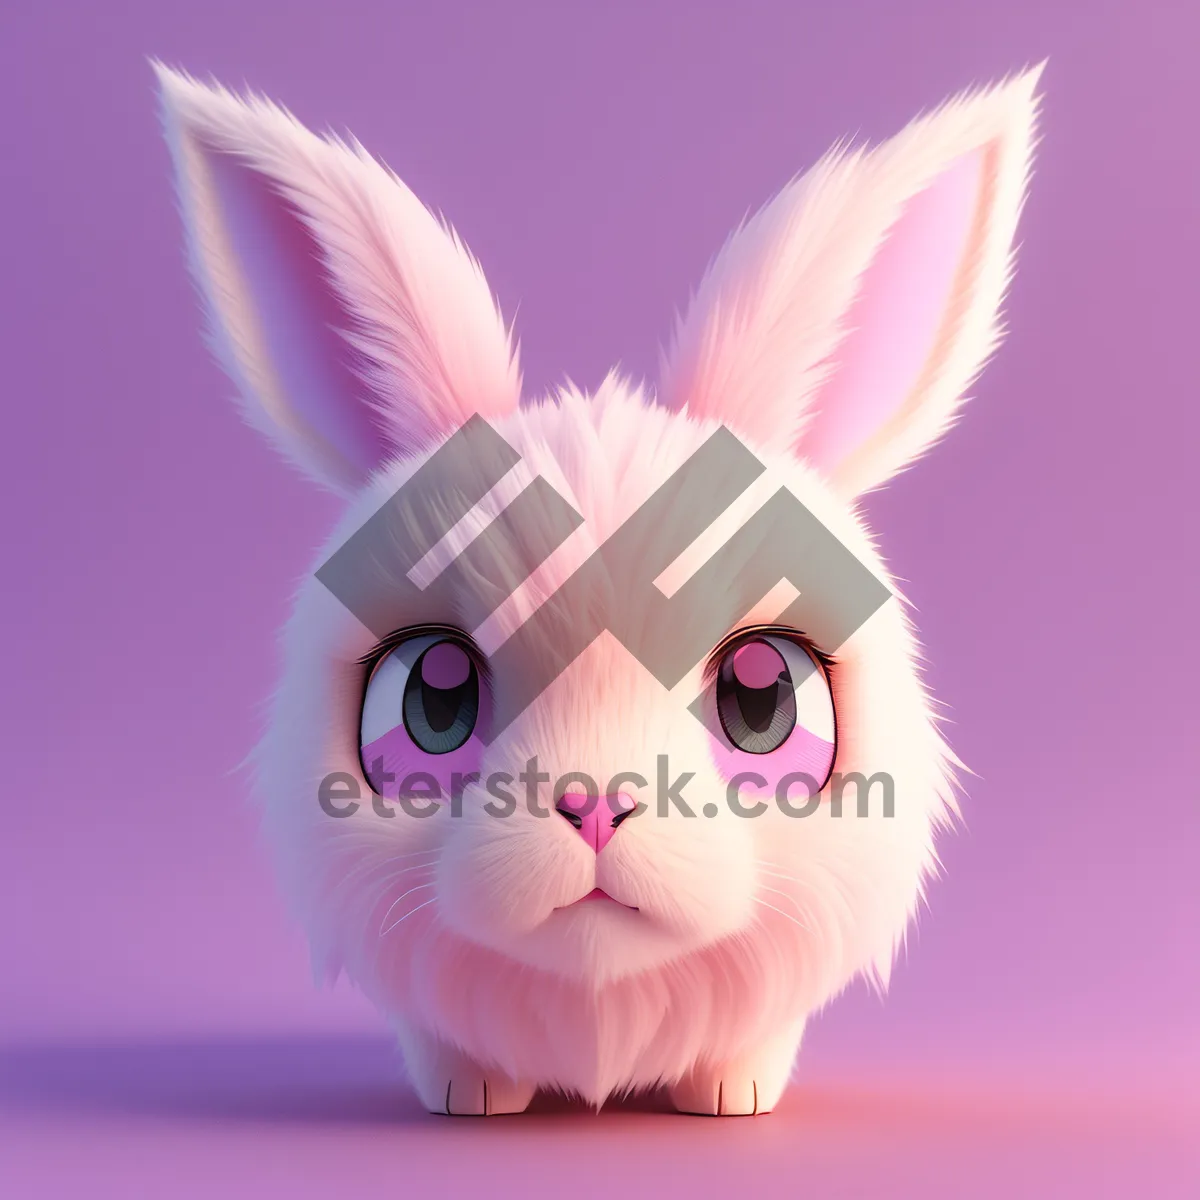 Picture of Cute Bunny with Fluffy Fur and Curious Eyes